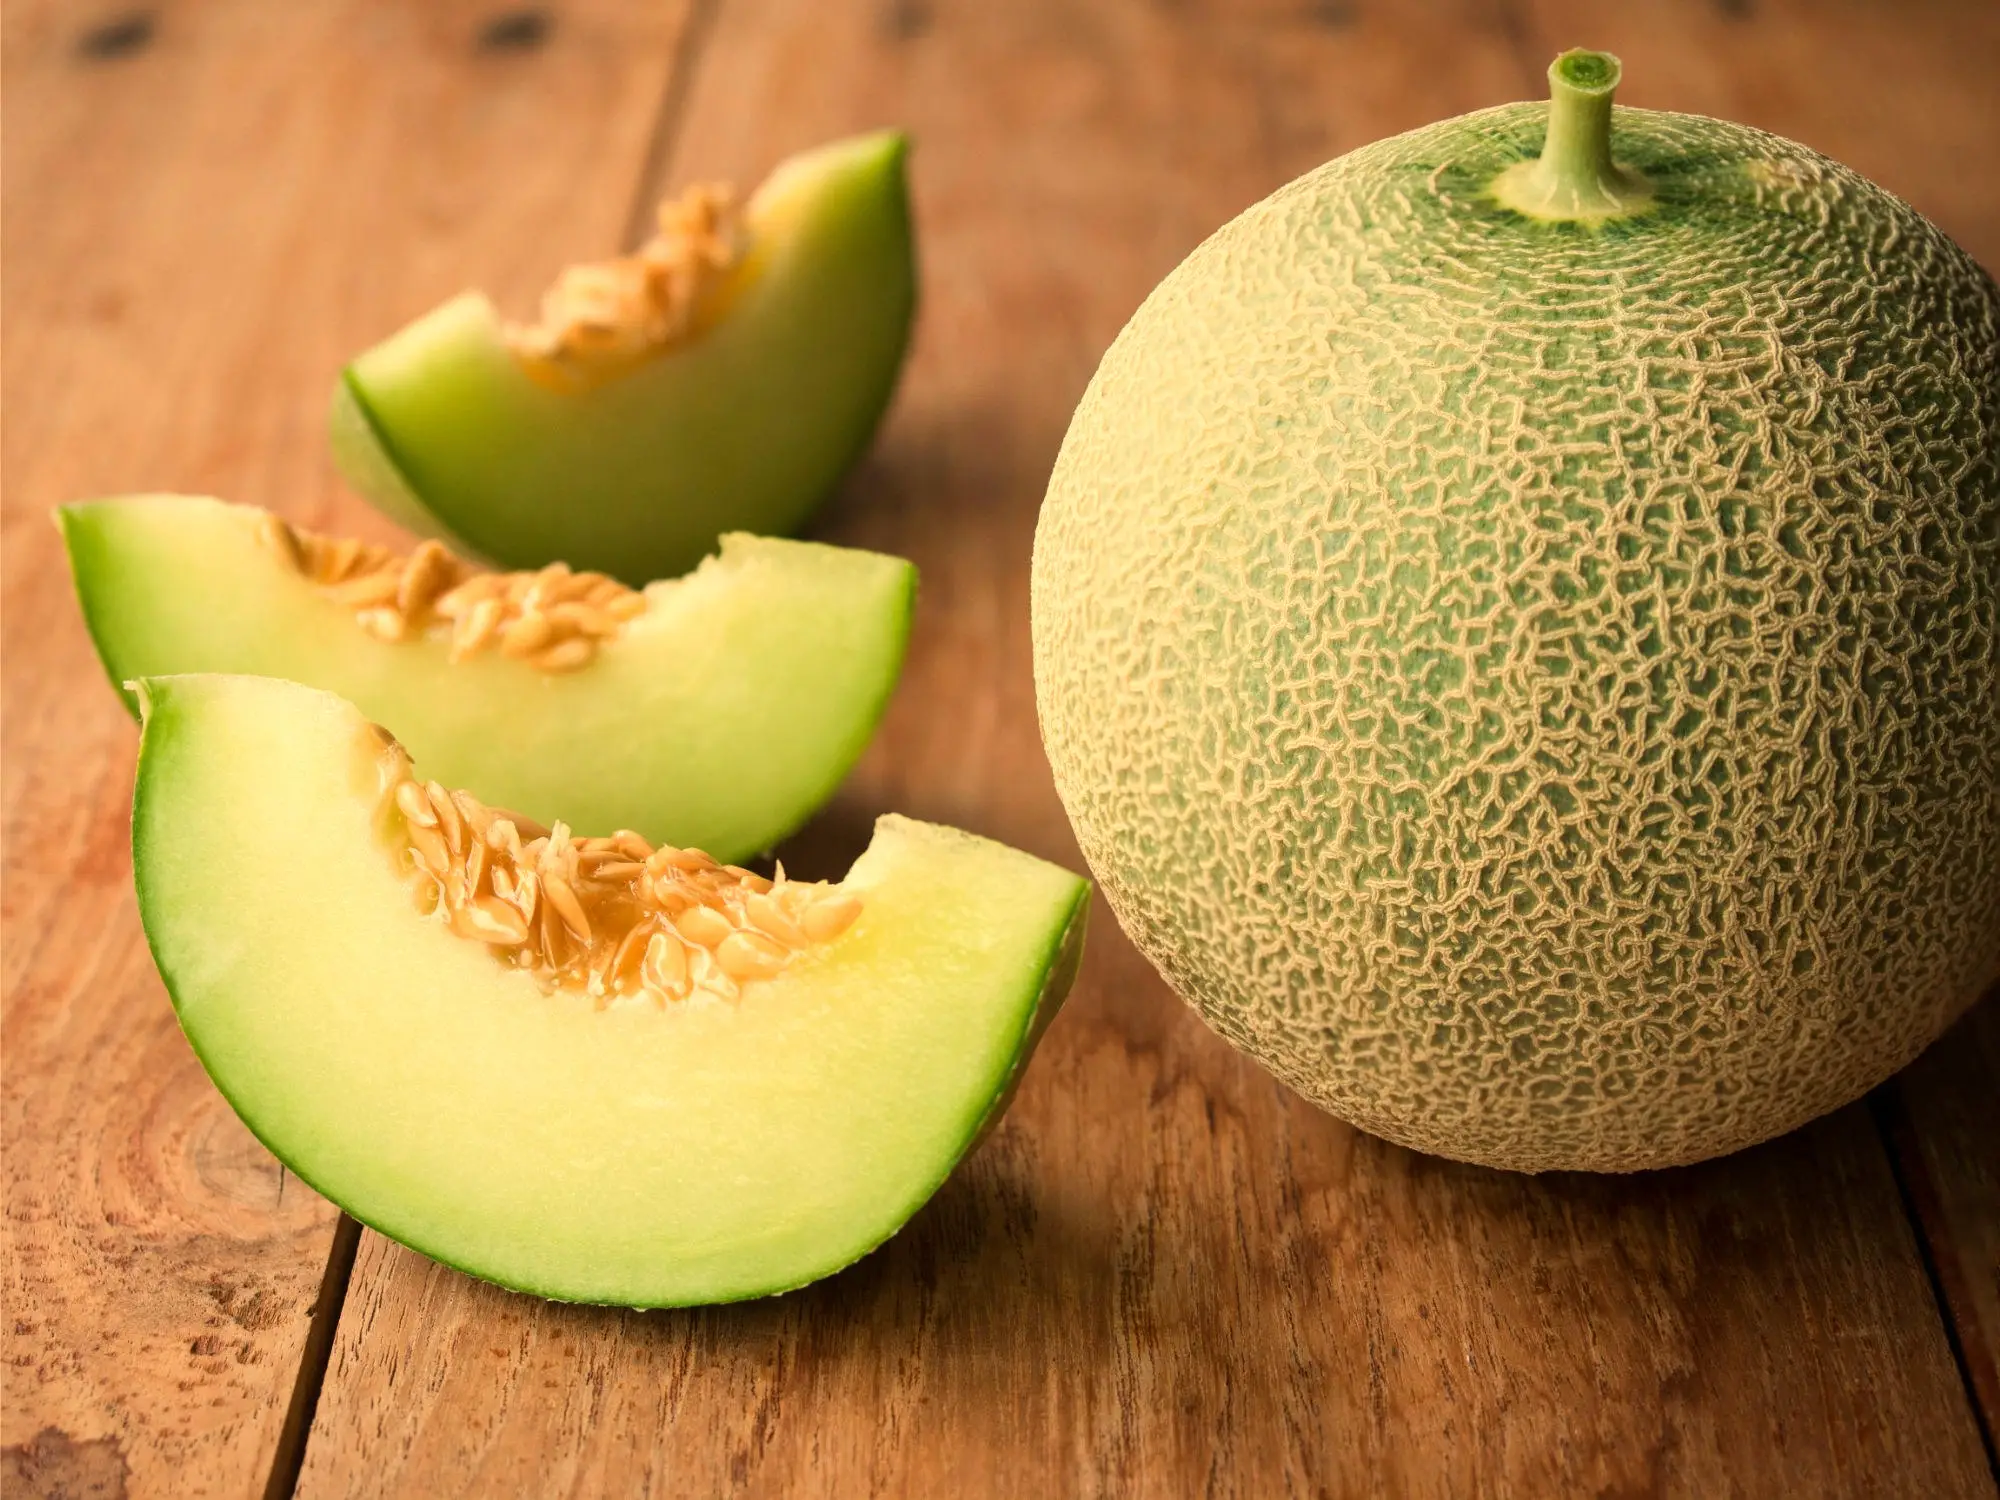 Through CRISPR/Cas9 gene editing, researchers extended the shelf life of a Japanese melon by reducing ethylene production via the CmACO1 gene, an inheritable change that doesn’t introduce foreign genes.